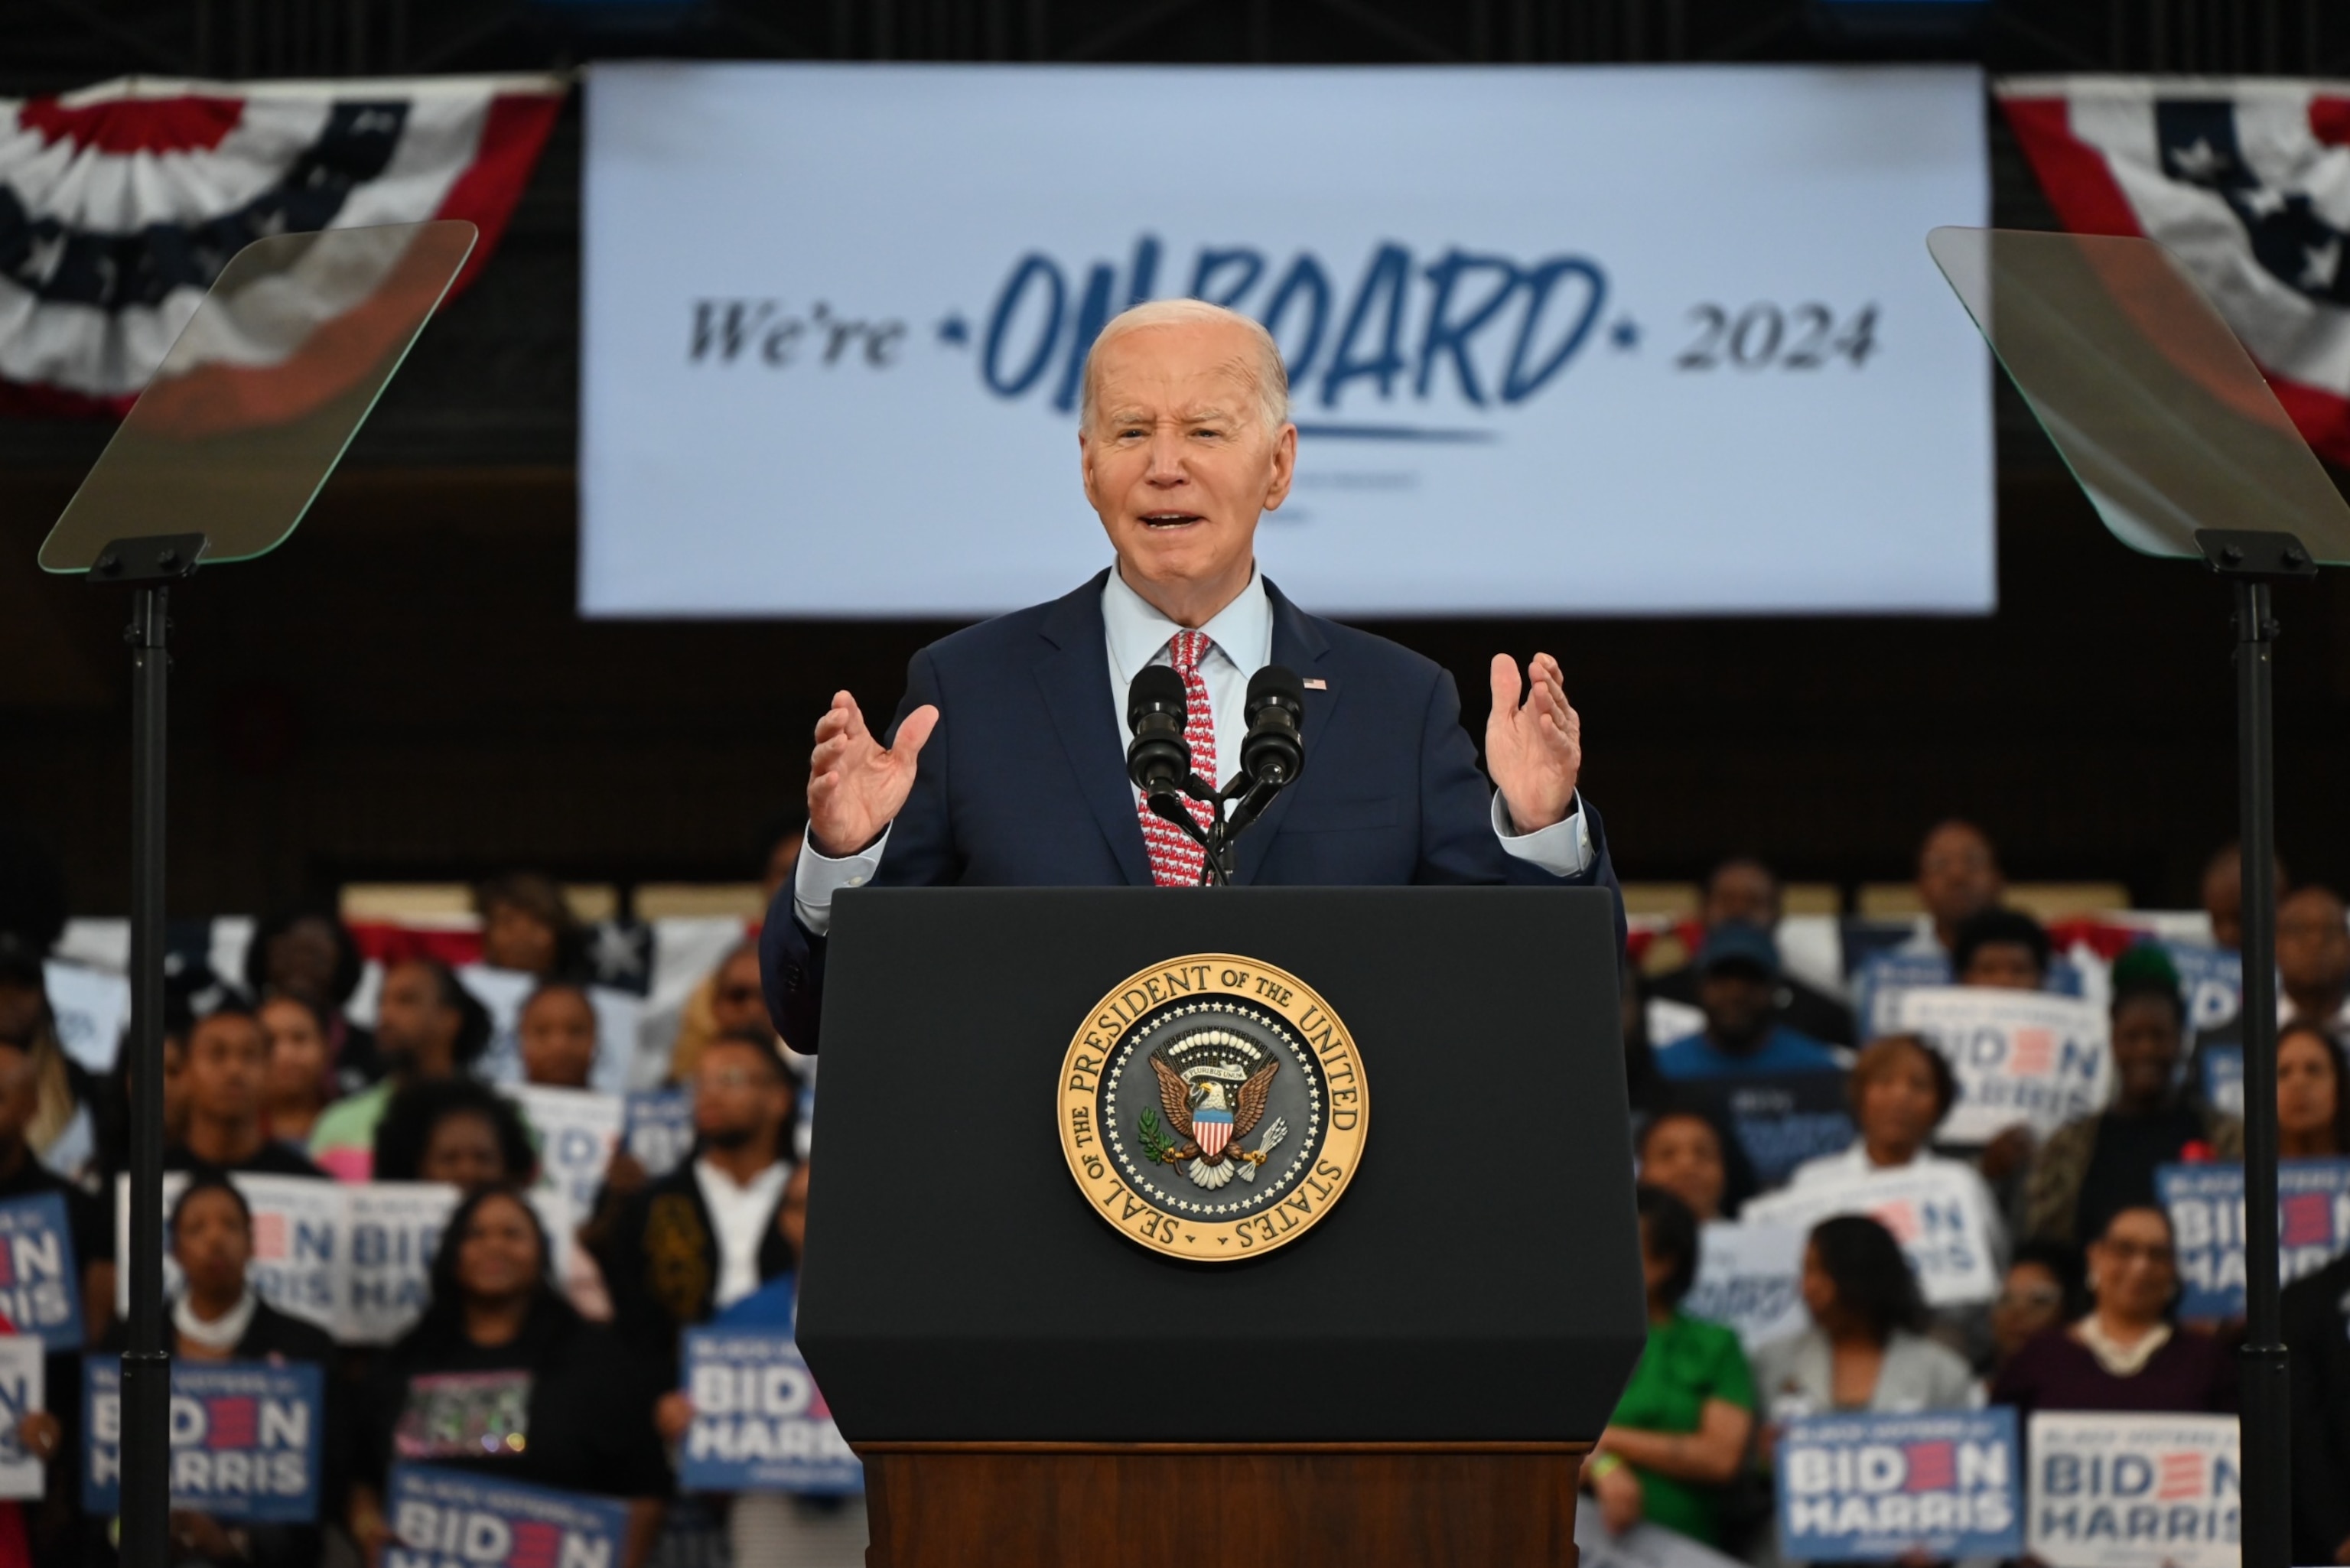 PHOTO: President of the United States Joe Biden speaks at a campaign rally with Vice President of the United States Kamala Harris at Girard College, May 29, 2024, in Philadelphia.